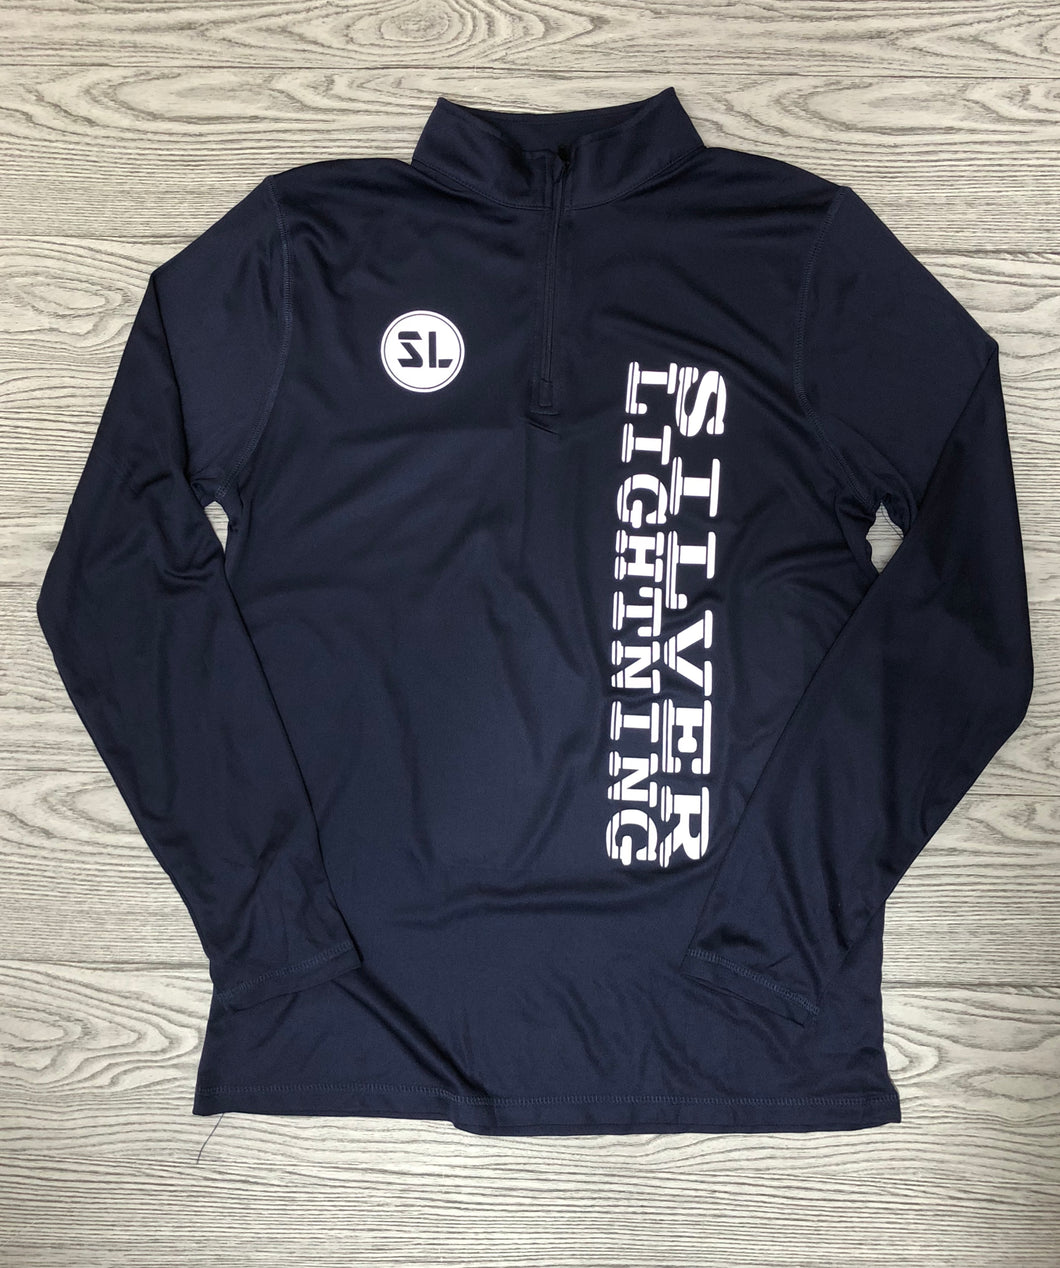 SL Quarter Wicking Zip Long Sleeve Reflective Pullover